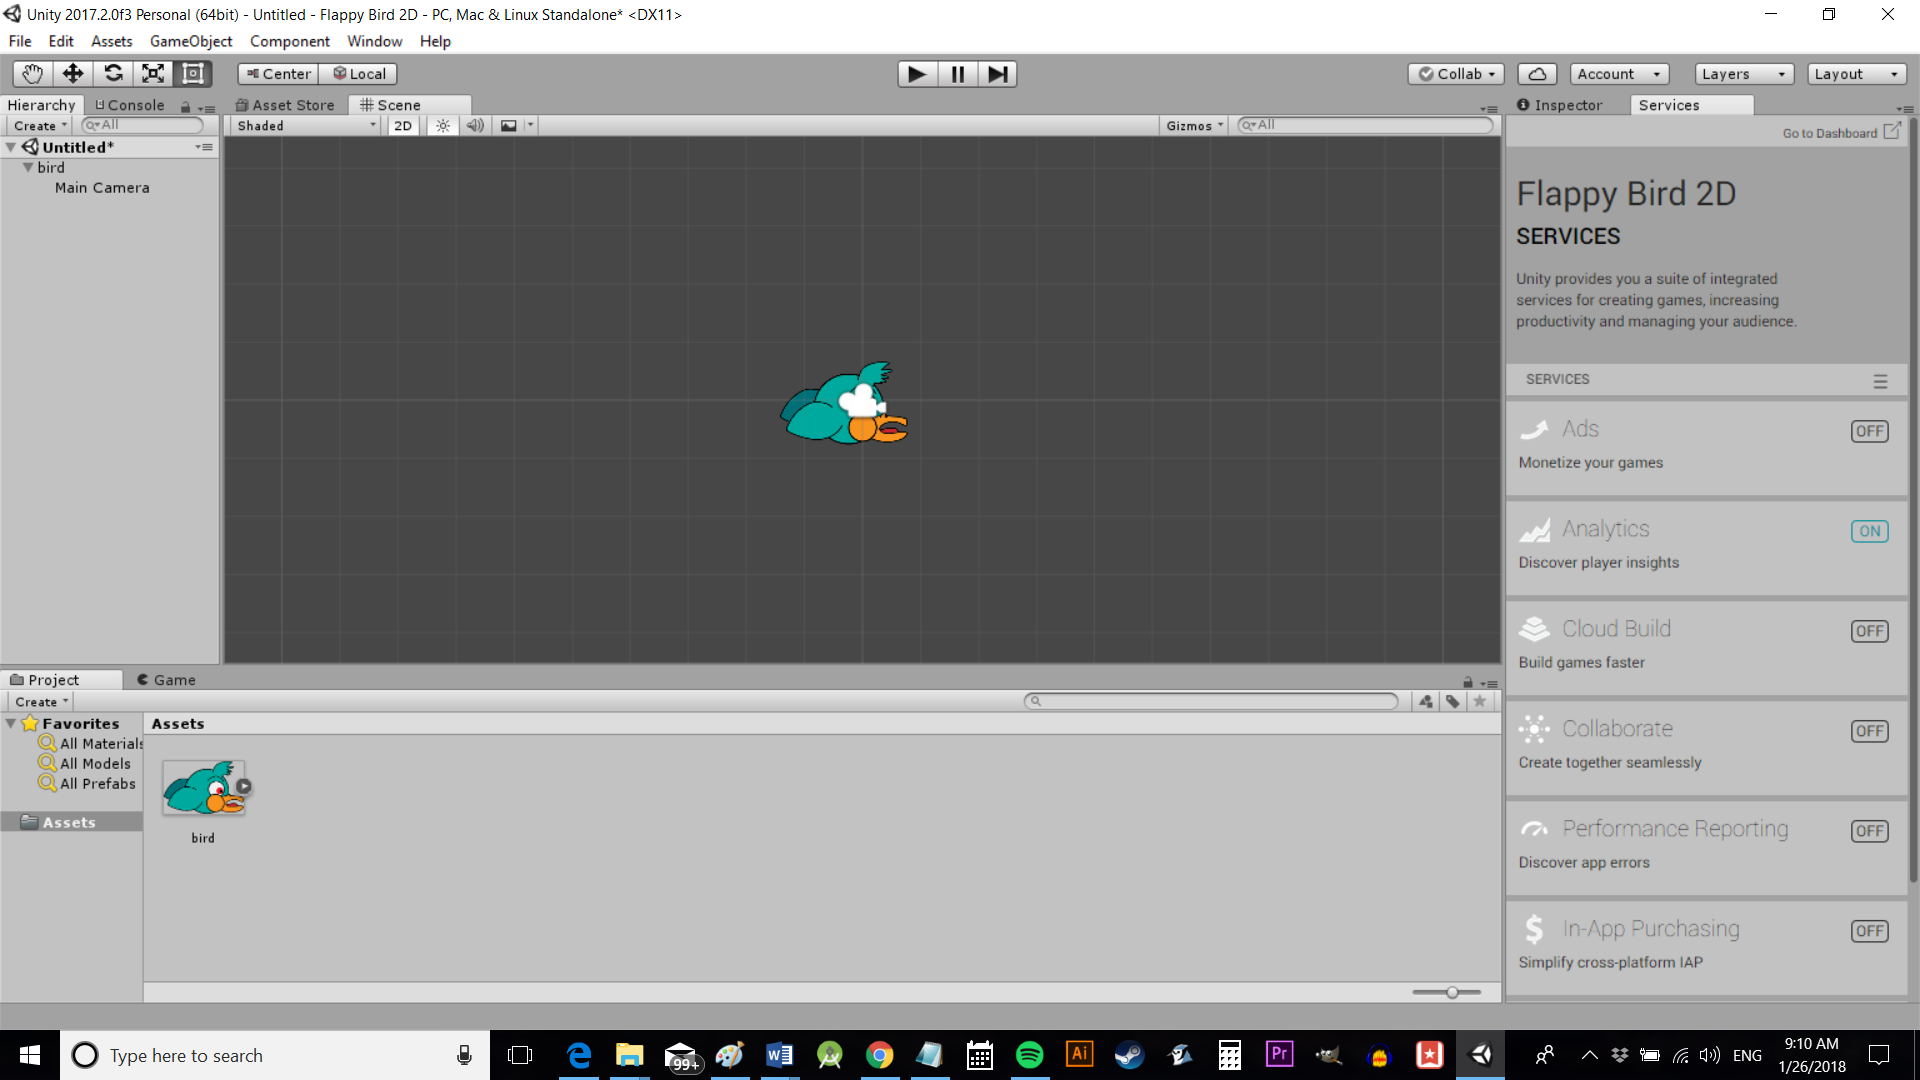 How to Build Flappy Bird in Unity 